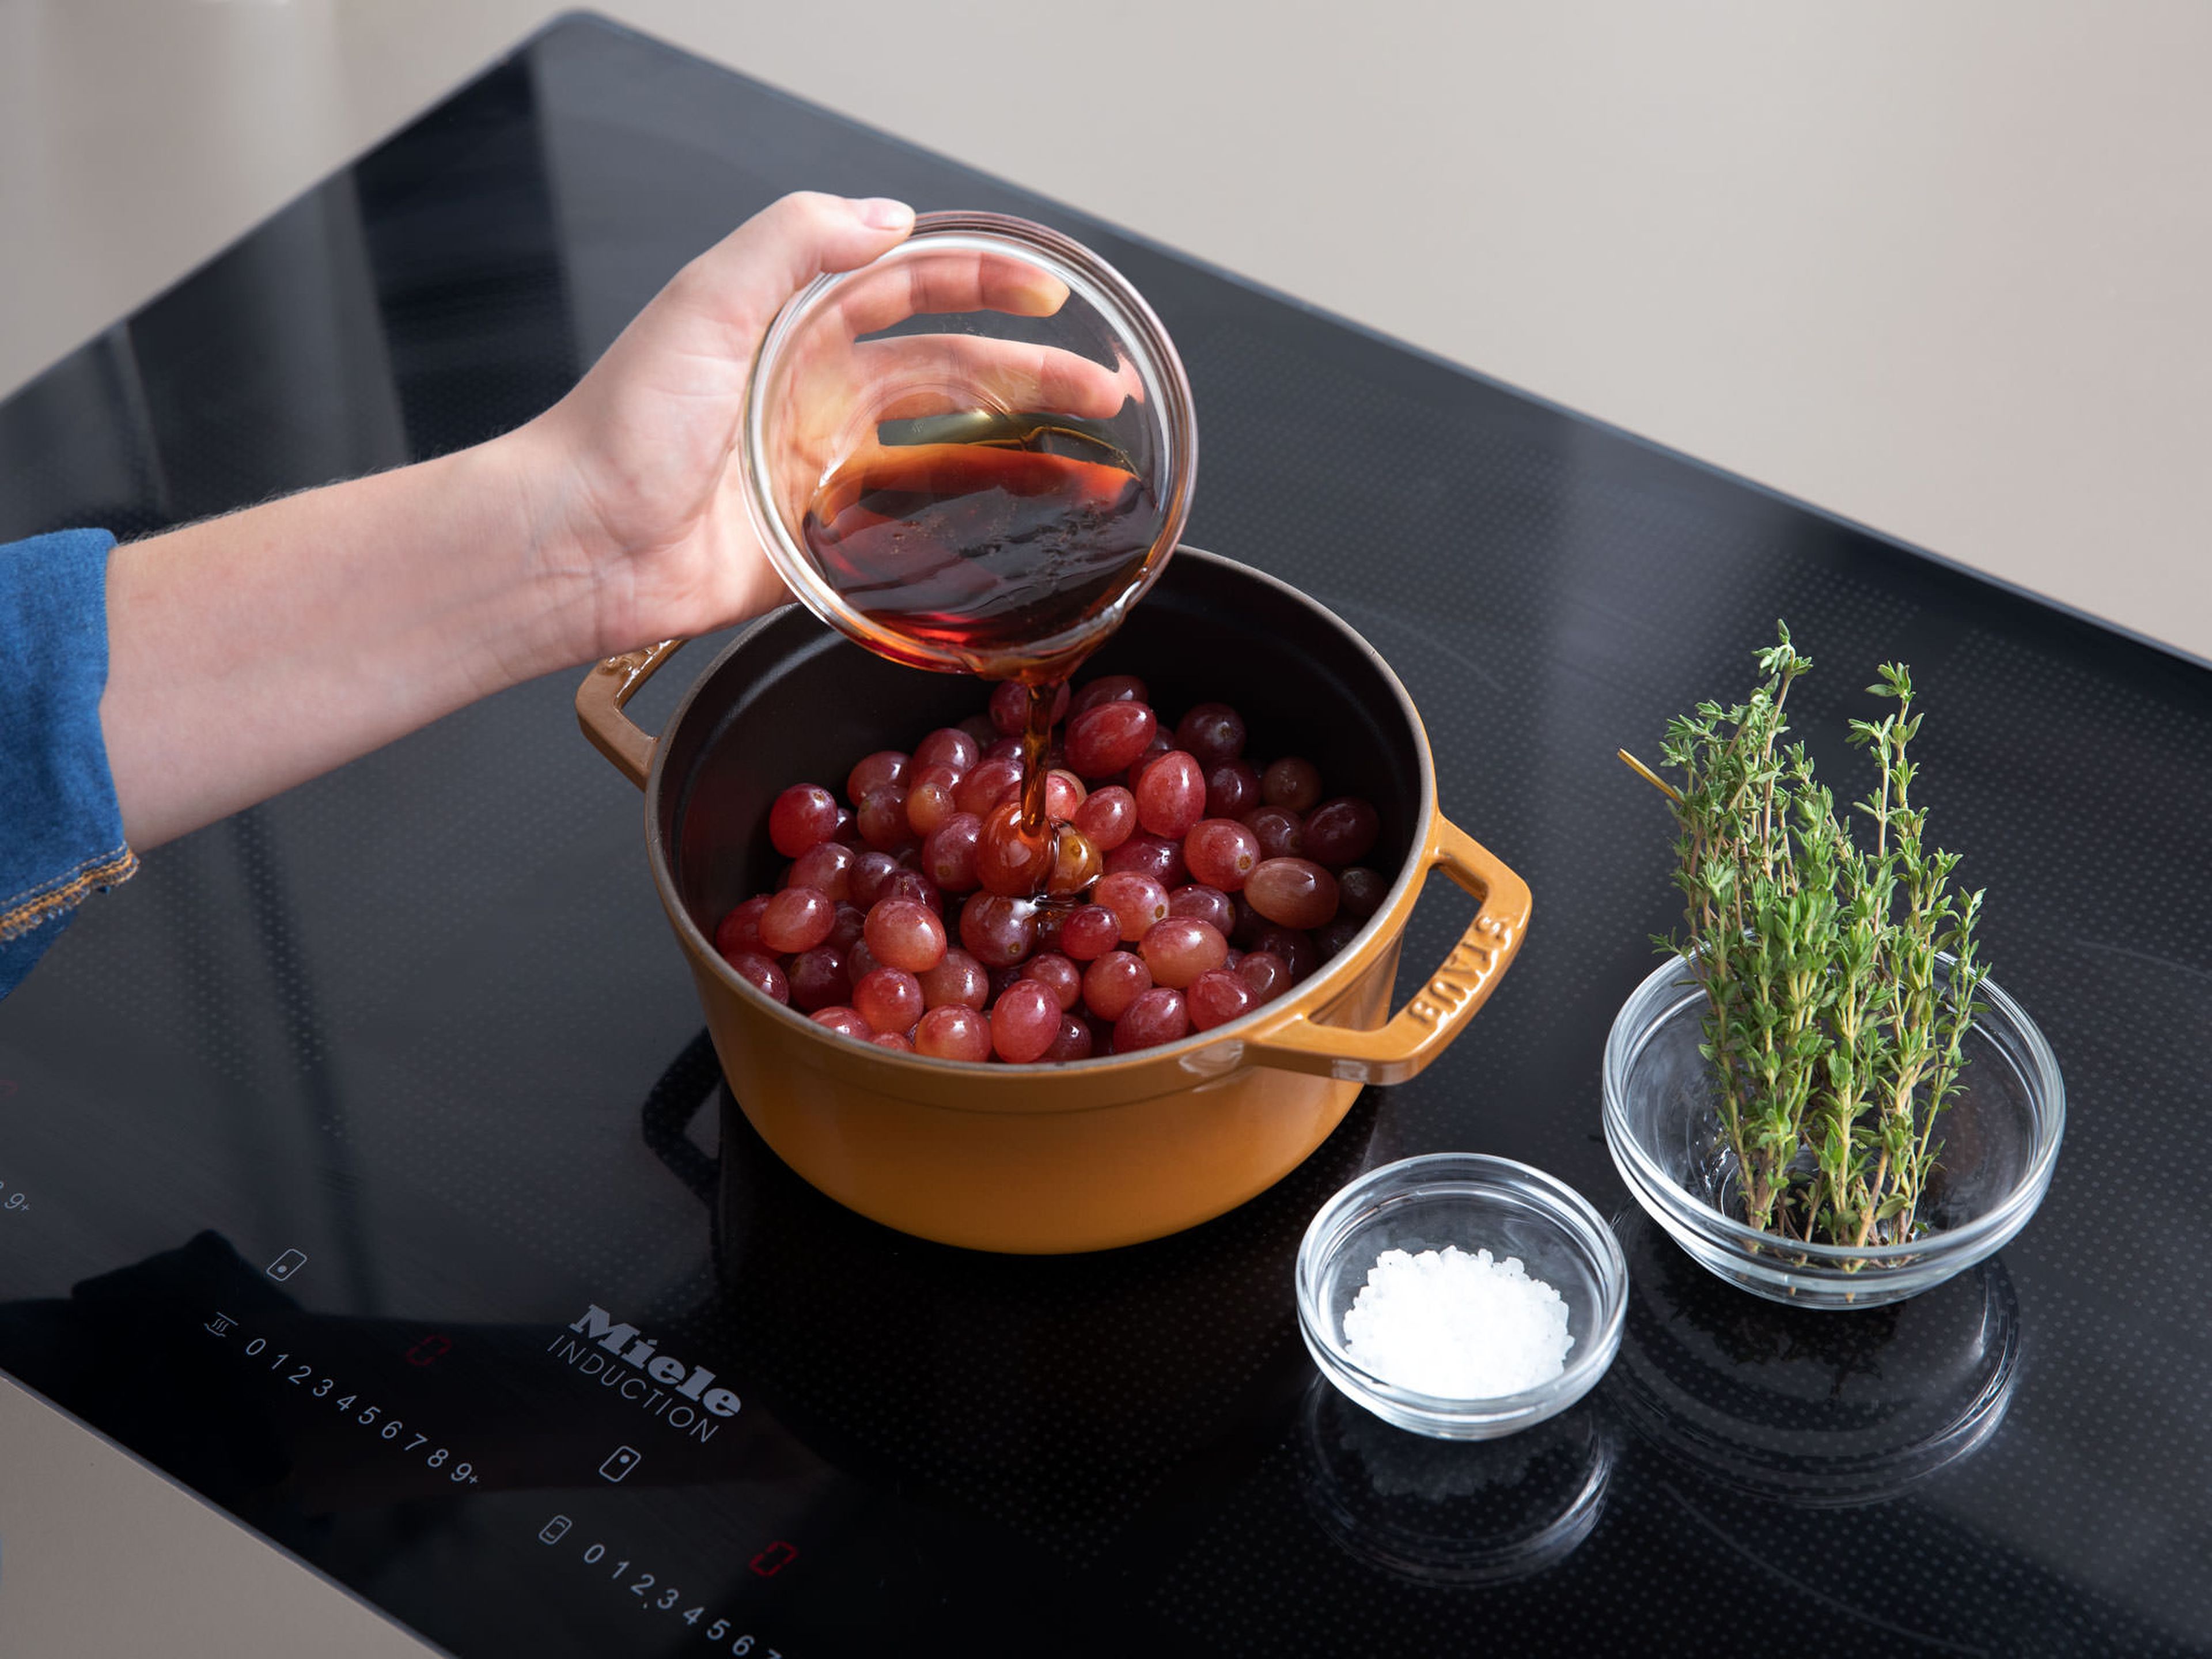 Wash grapes and add to a pot set over medium-high heat along with the maple syrup, thyme, and a pinch of sea salt. Bring to a boil and let simmer on low heat for approx. 10 min., or until grapes are soft and have burst. Set aside and let cool.